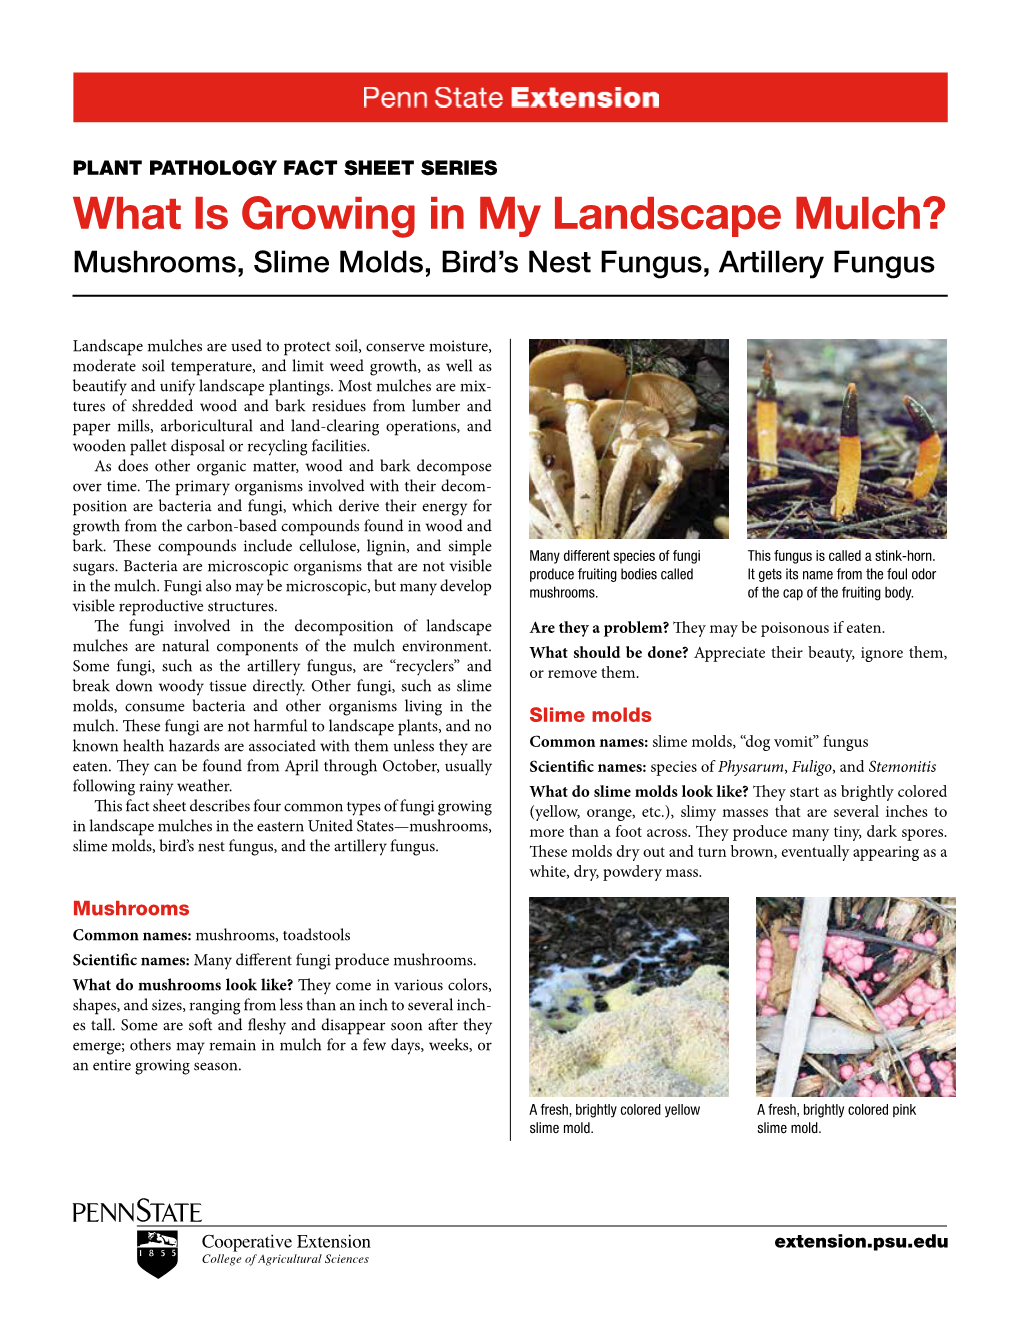 What Is Growing in My Landscape Mulch? Mushrooms, Slime Molds, Bird’S Nest Fungus, Artillery Fungus